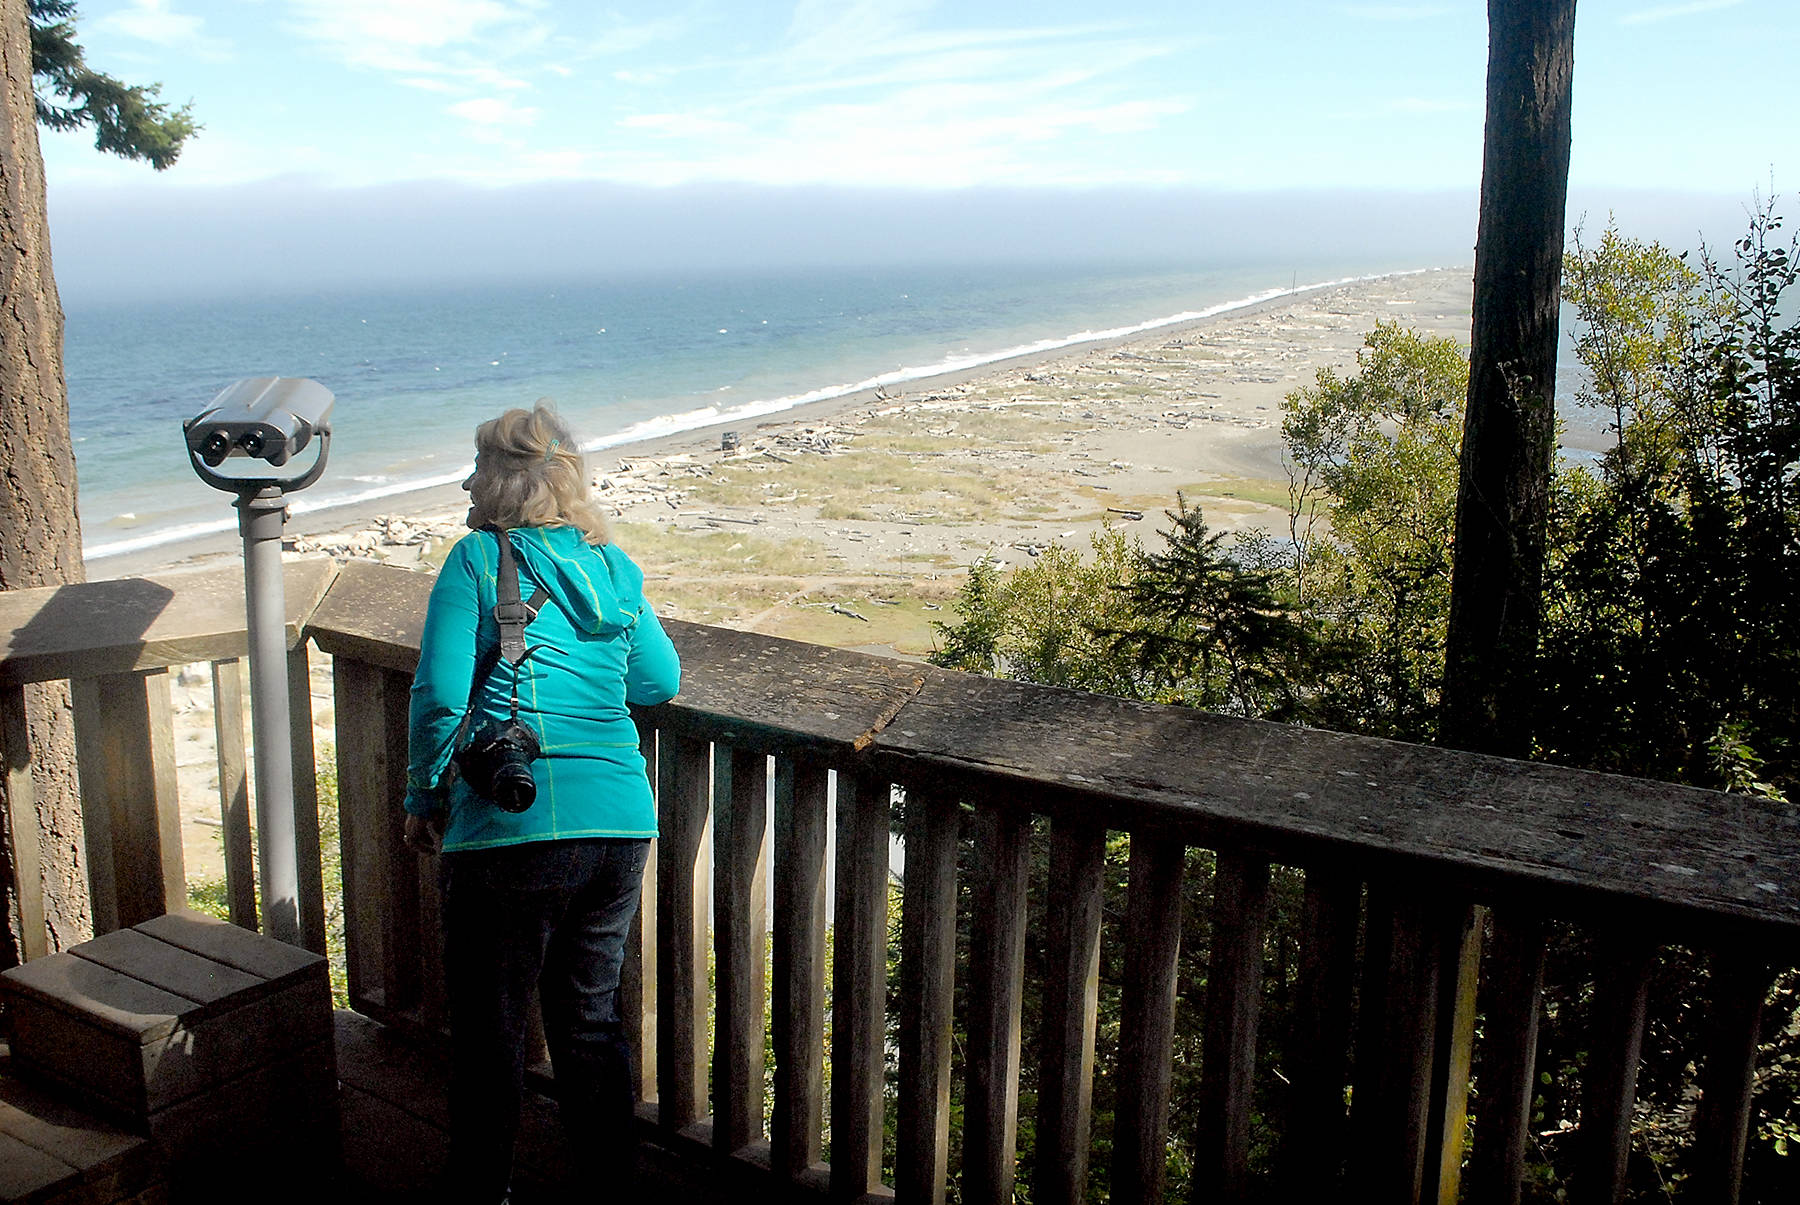 Keith Thorpe/Peninsula Daily News
Phyllis Millan of Wilsonville, Ore., admires the view on Dungeness Spit on Thursday from an overlook in the Dungeness National Wildlife Refuge north of Sequim. The refuge, home to a variety of birds and marine mammals, offers the access trail to hikers along the spit.